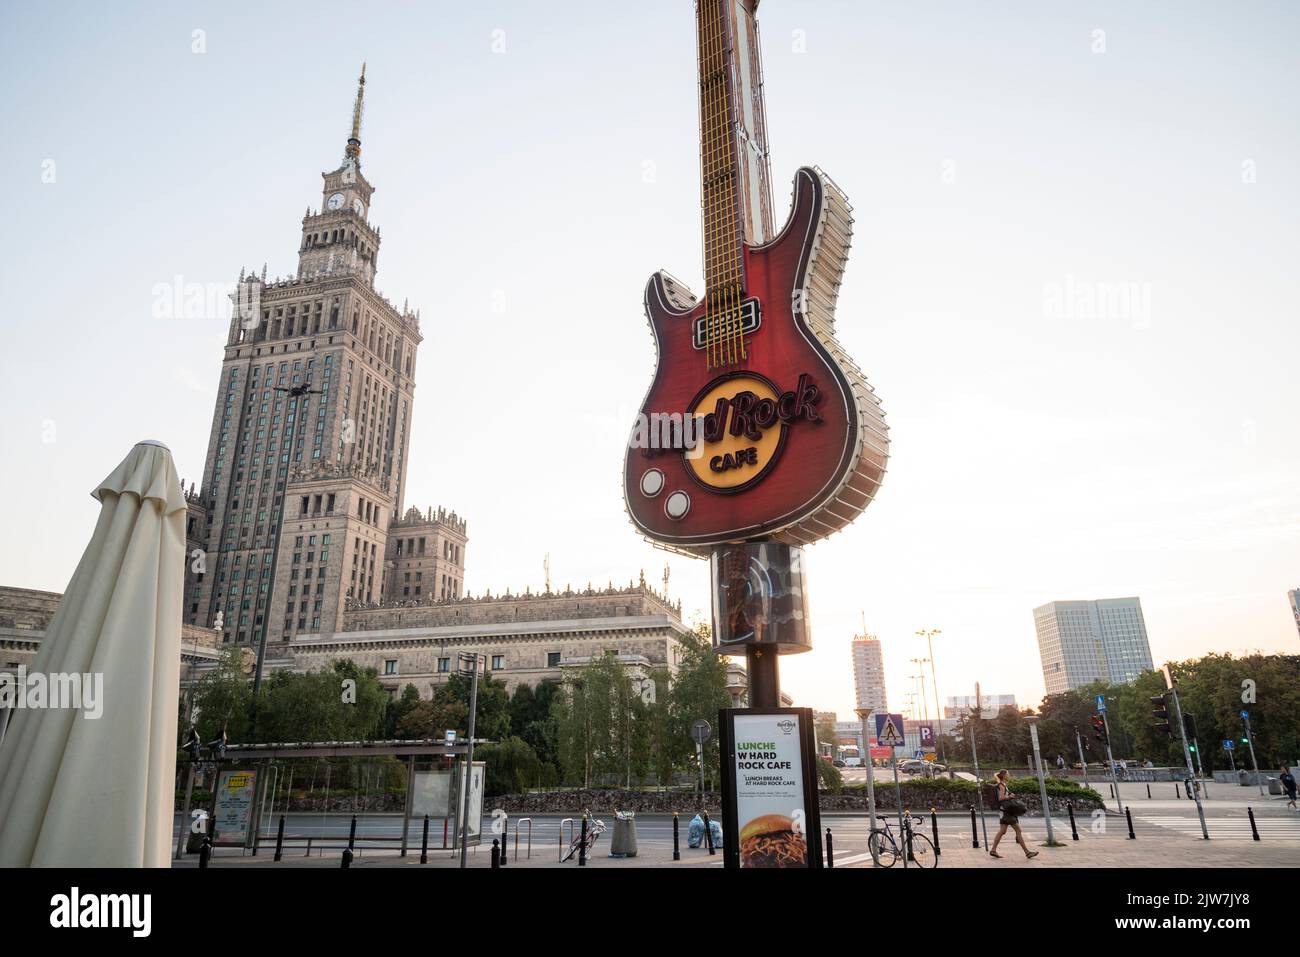 Warsaw Poland - February 13, 2021, house of culture and science in the city center Stock Photo